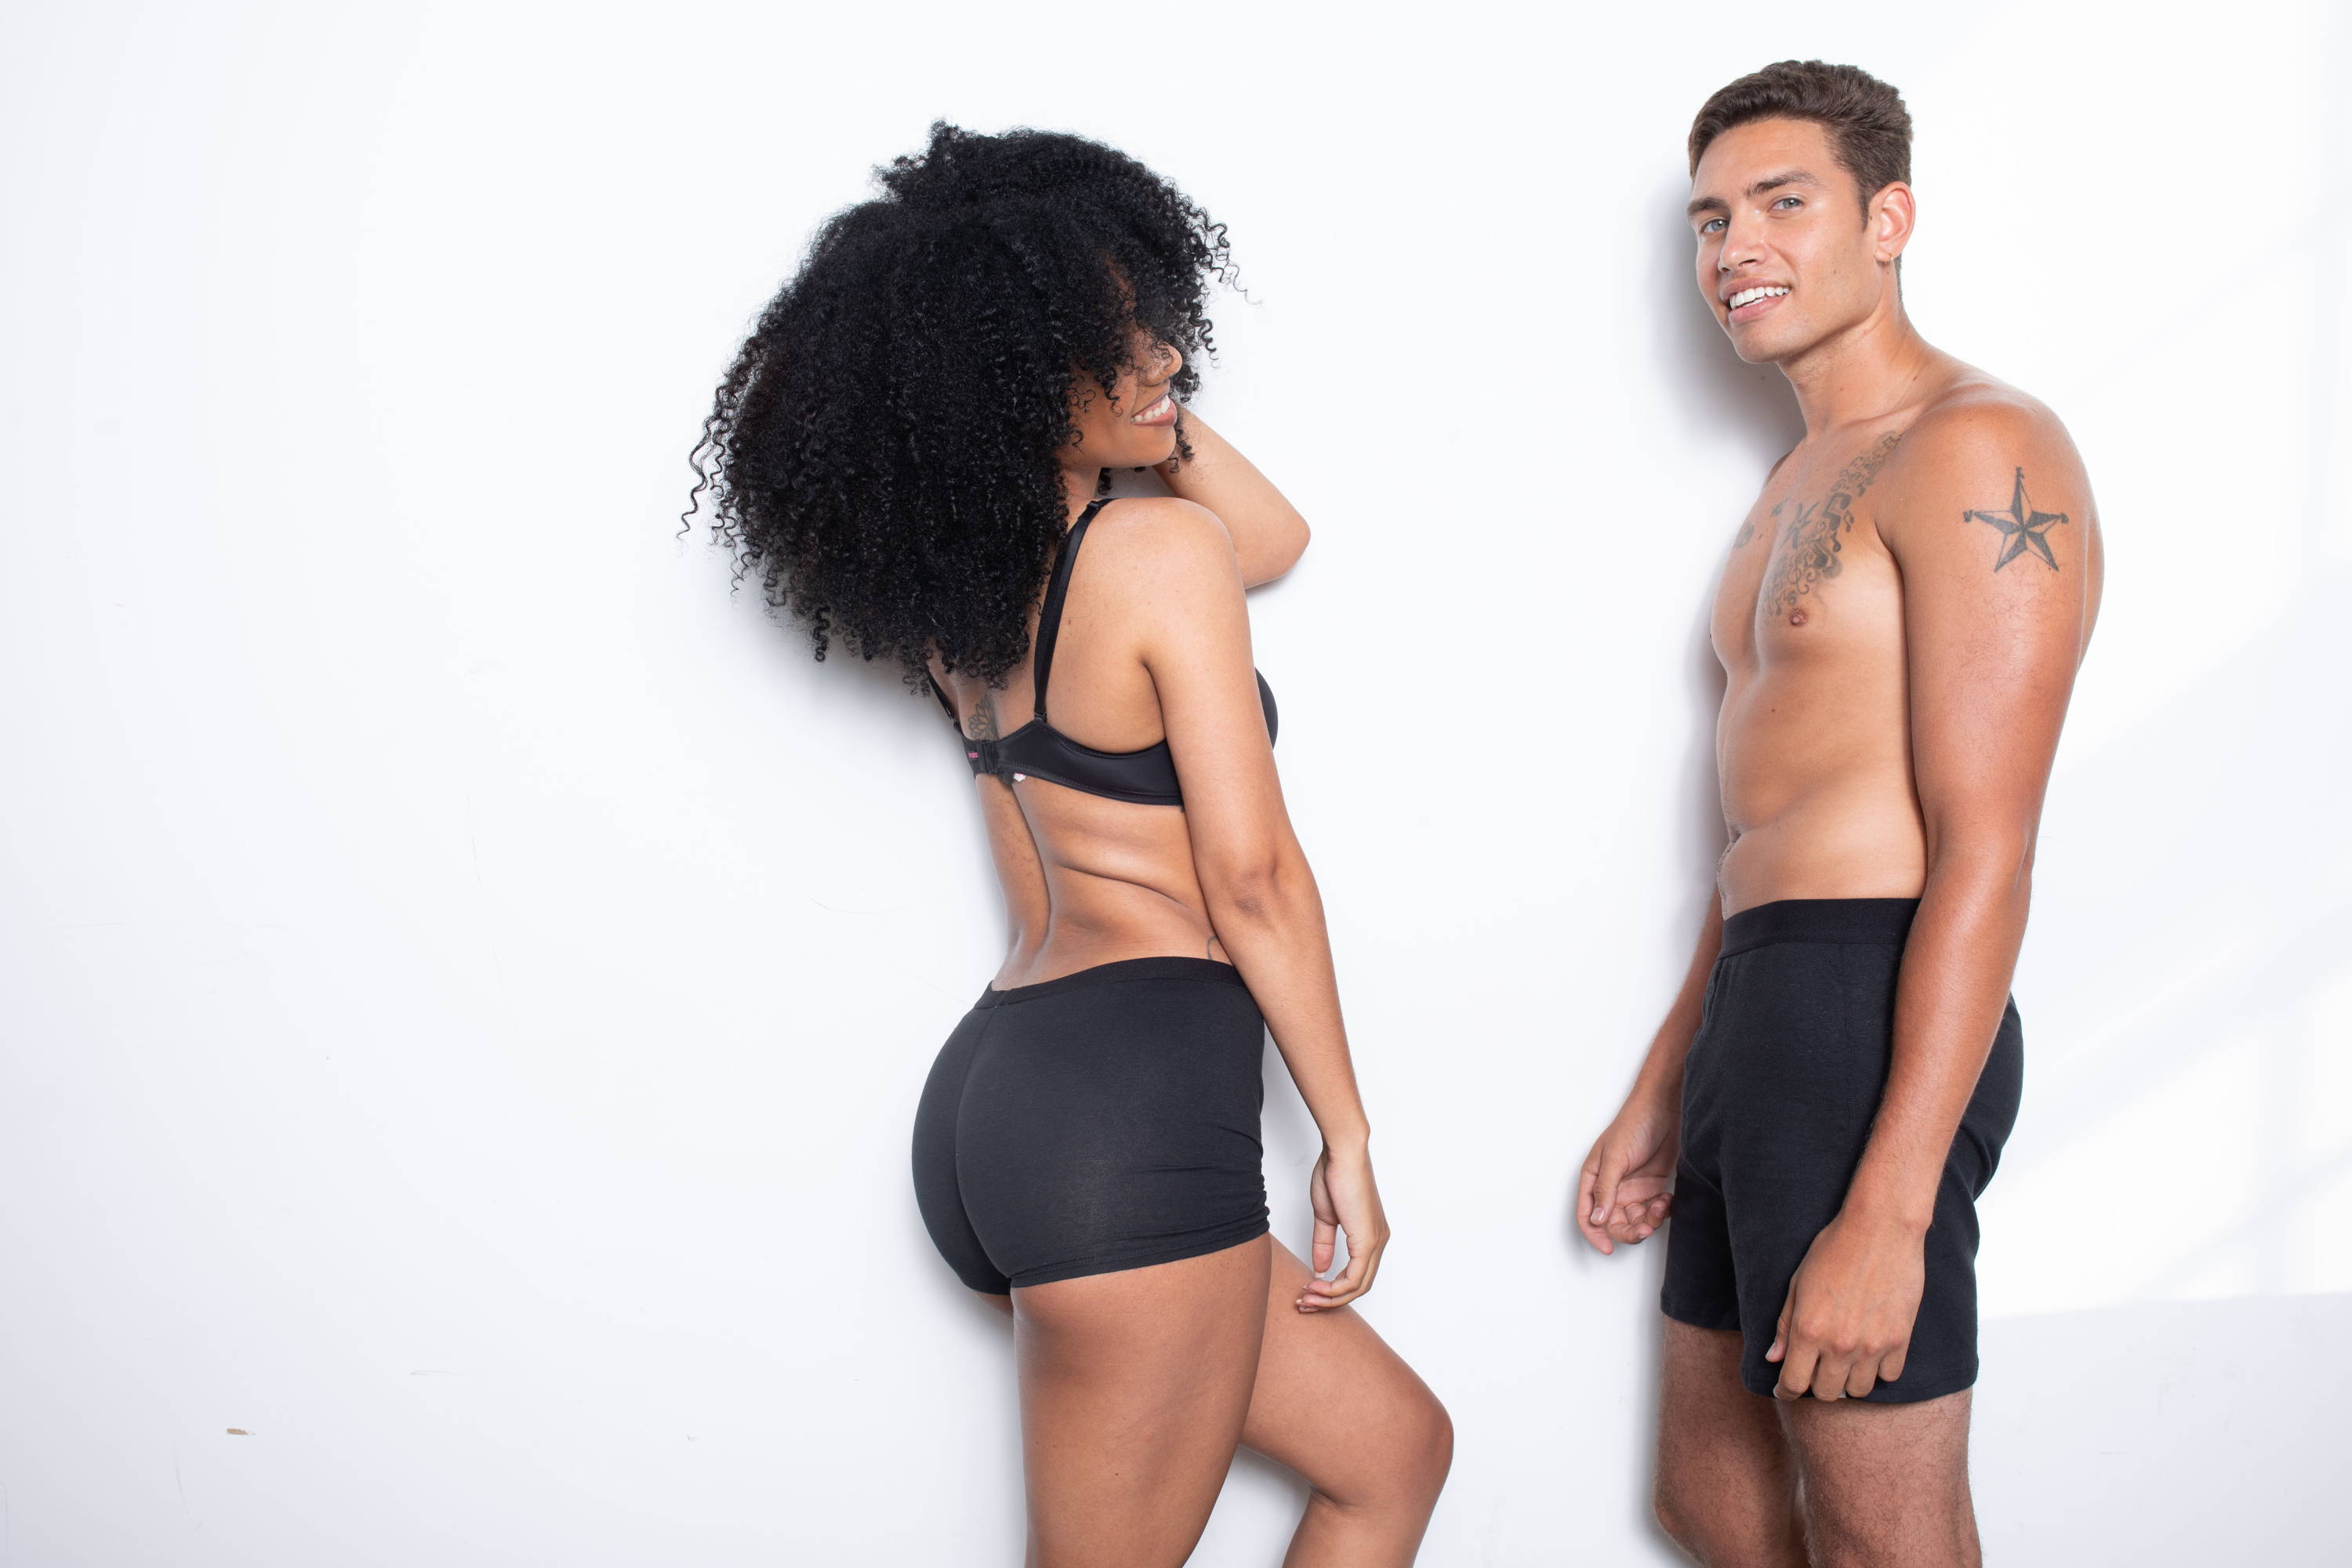 What bra sizes and panties size do men wear? Do men wear bras and panties?  What materials, styles, and features do they like? Are they comfortable  with women's sizing? What would they